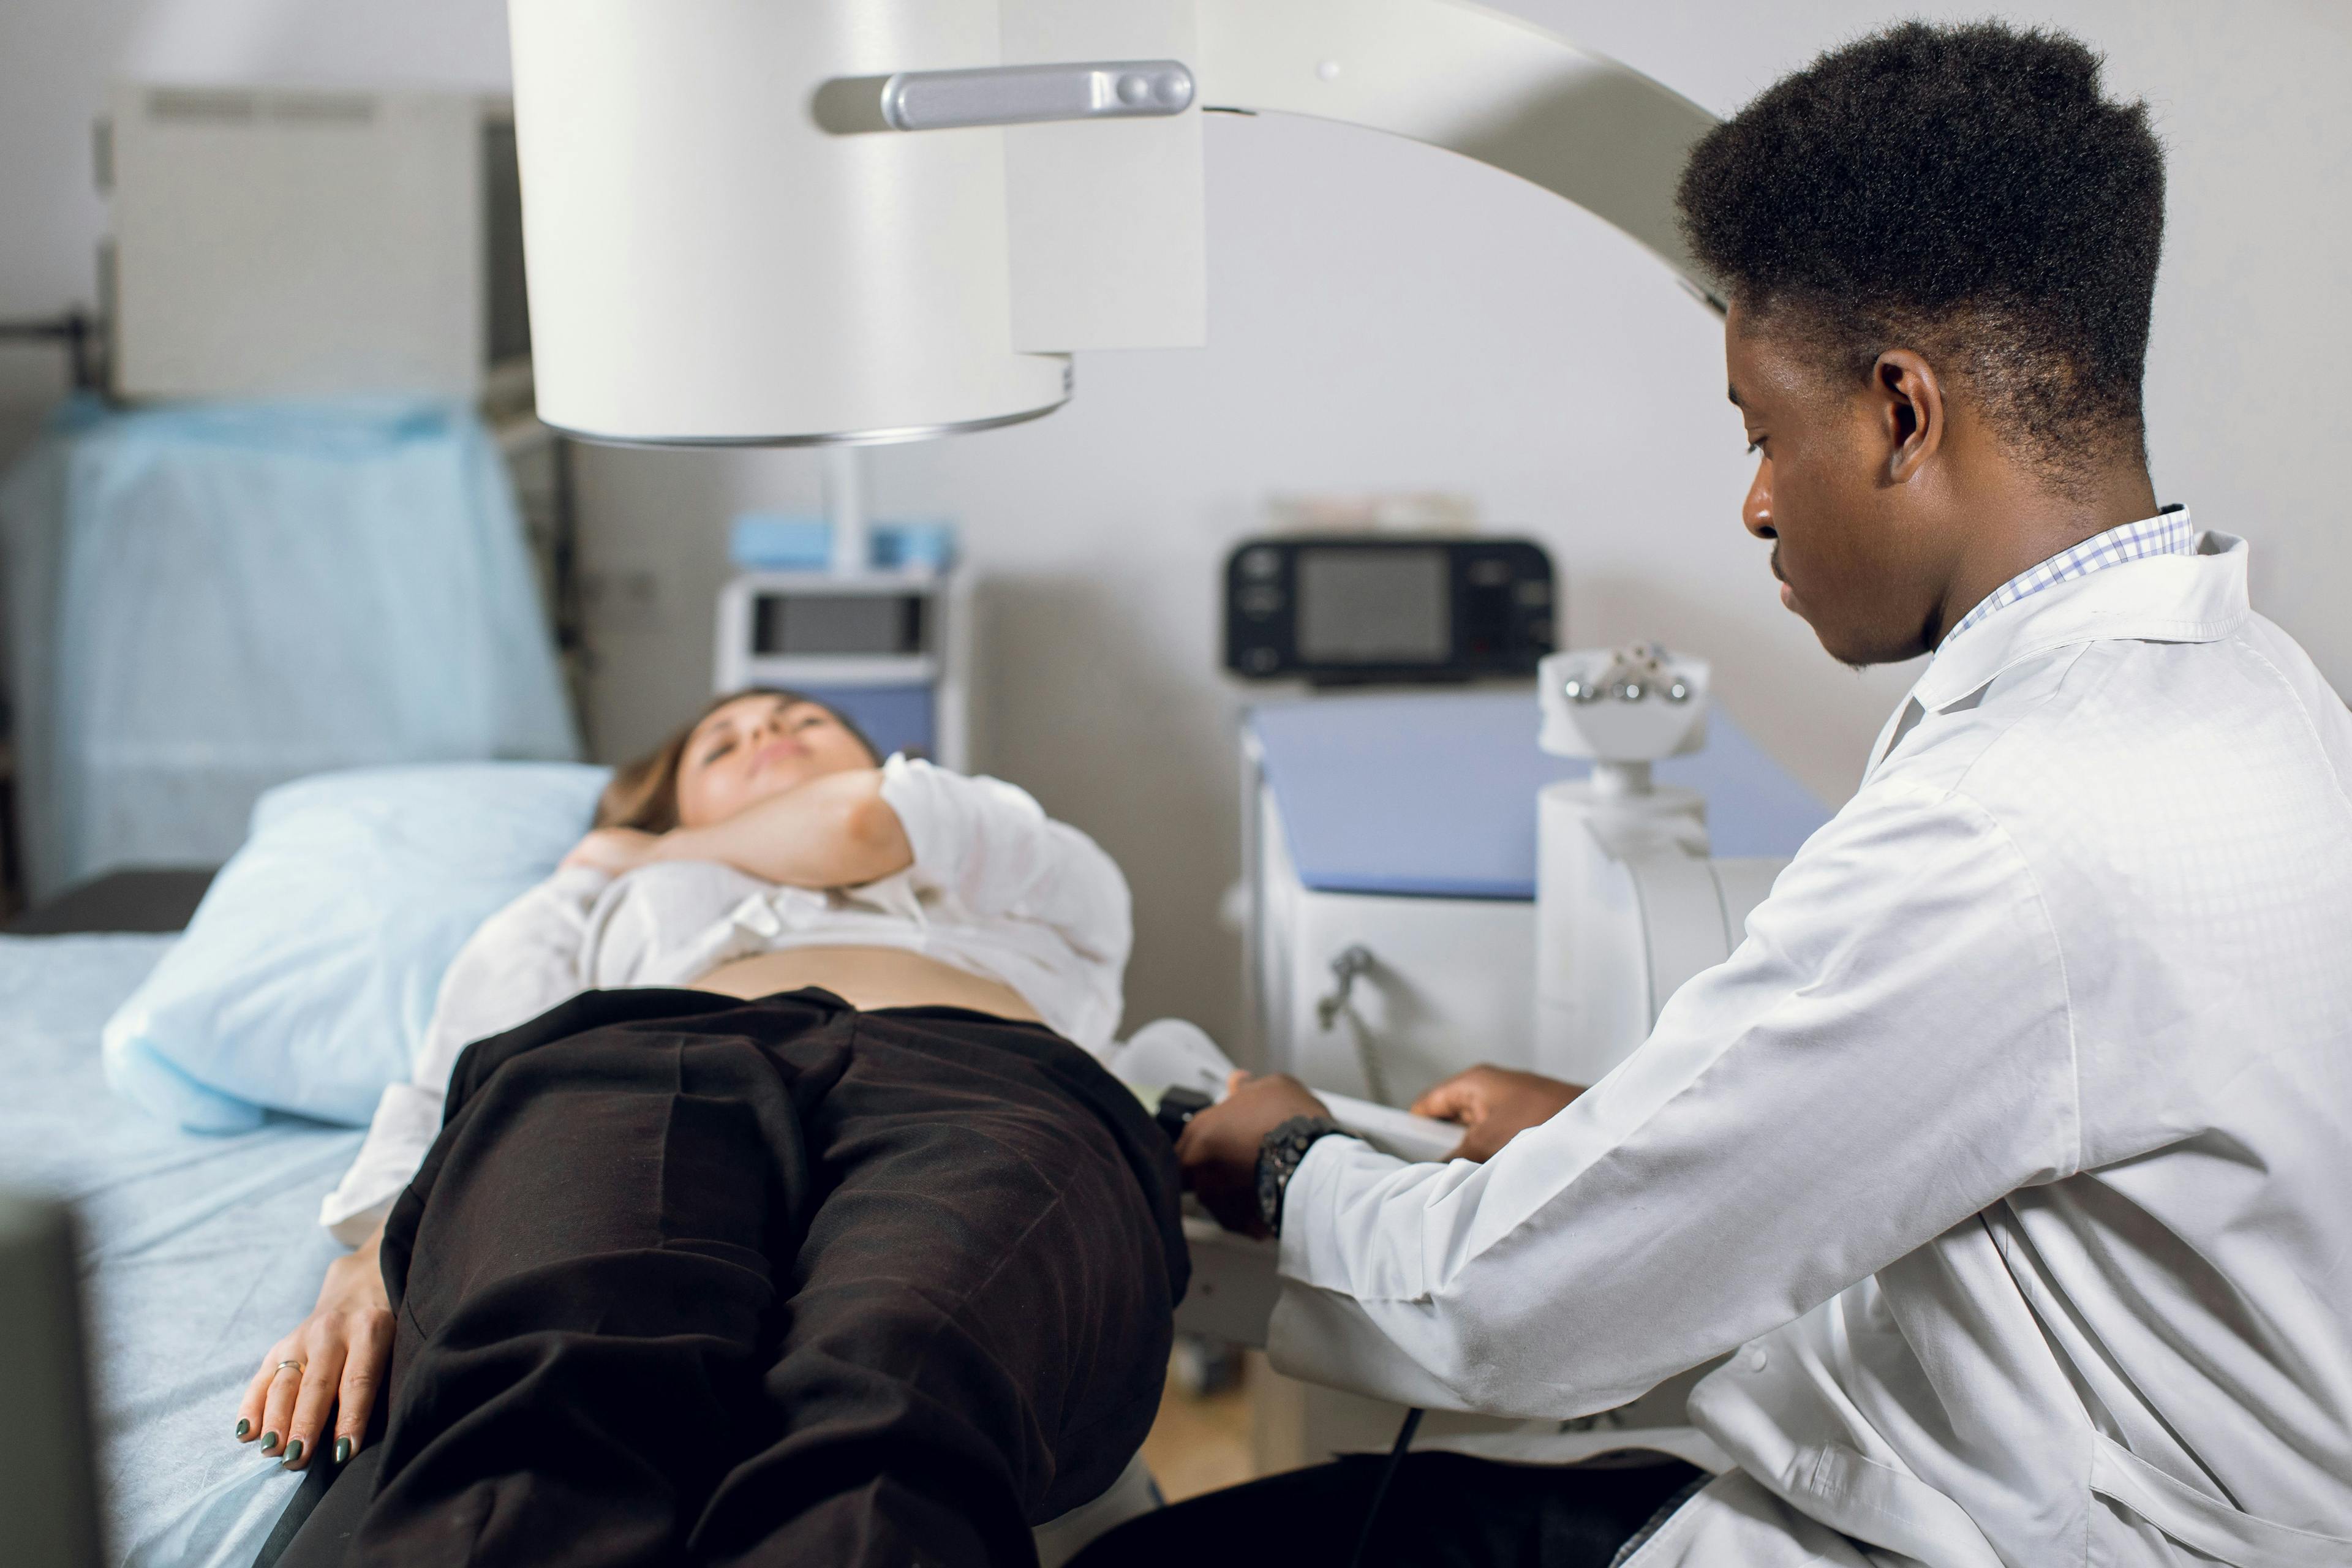 Health systems say proposed CMS payments for outpatient care in 2024 are inadequate and don't reflect the rising costs hospitals are facing. (Image credit: ©sofiko14 - stock.adobe.com)